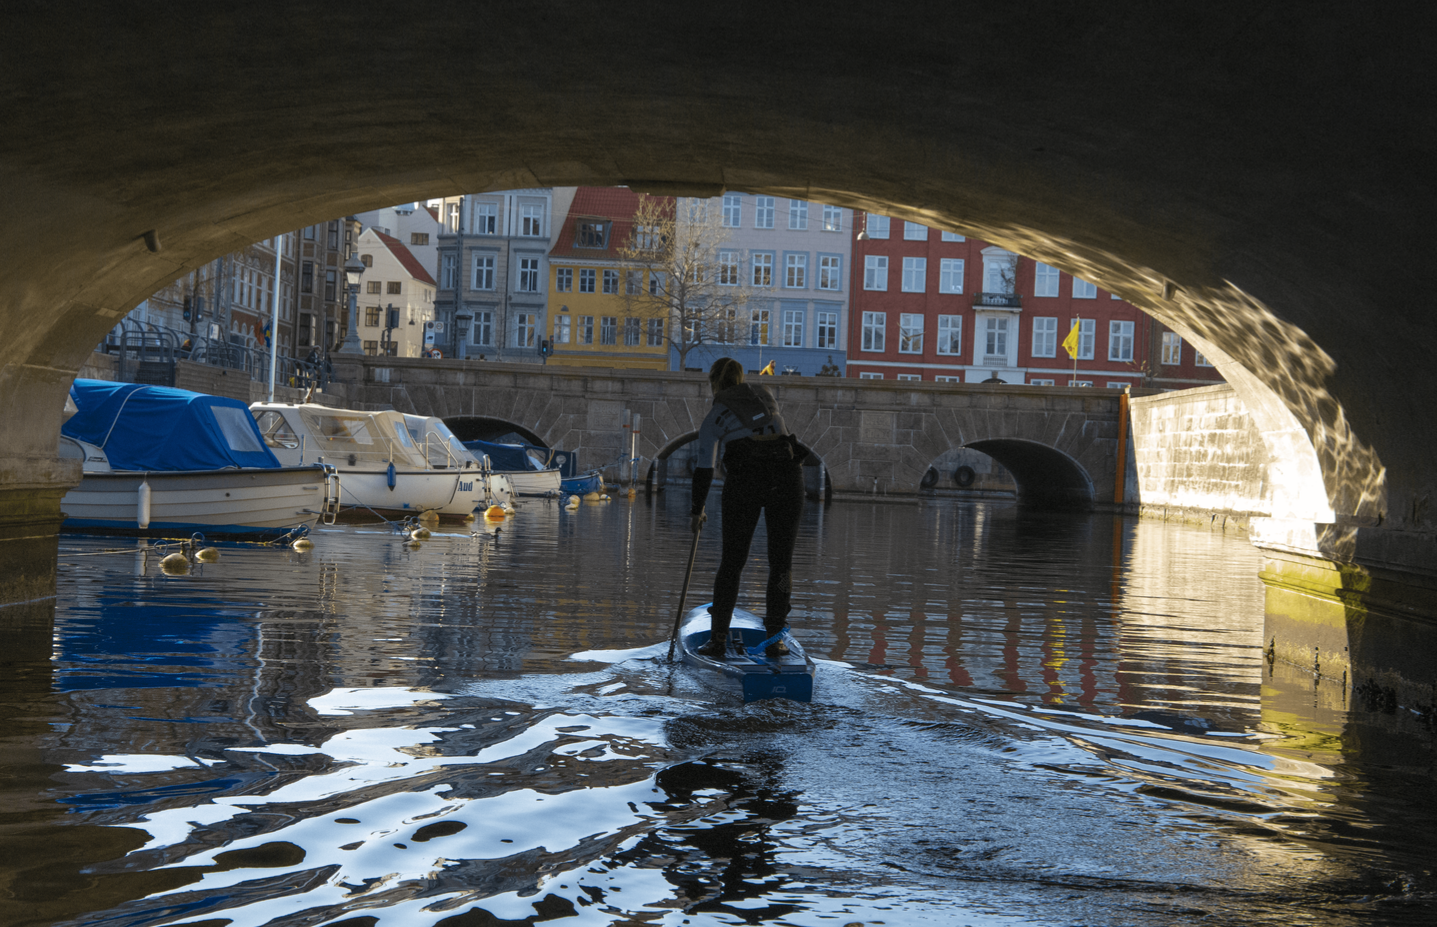 Rent a Boat in Copenhagen without a license now - GoBoat Denmark